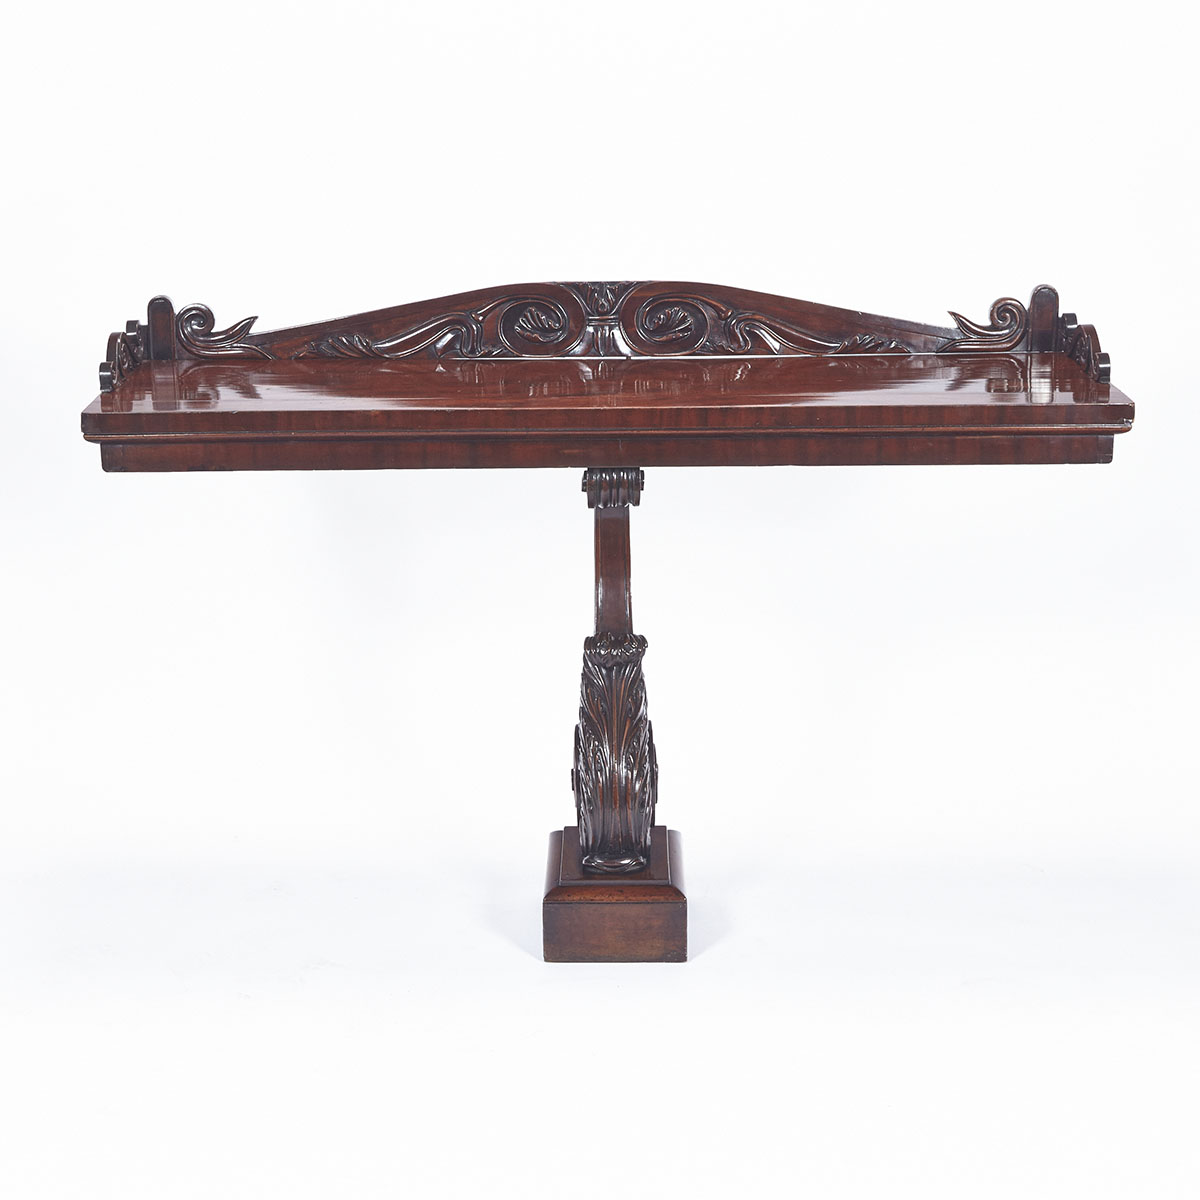 REGENCY MAHOGANY CONSOLE TABLE ON A FINELY CARVED ACANTHUS FORM PEDESTAL